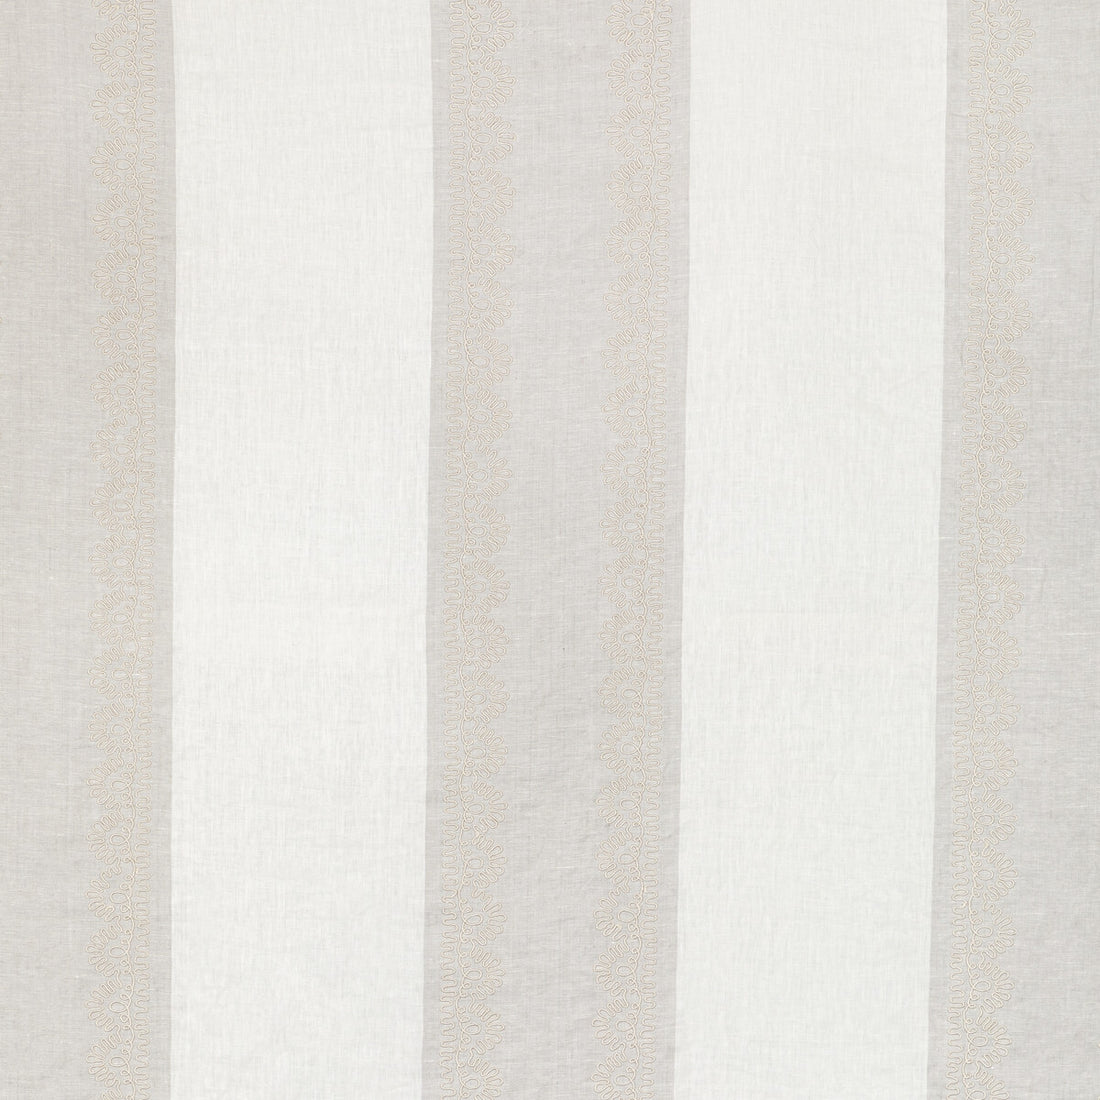 Banner Sheer fabric in quartz color - pattern 2021123.110.0 - by Lee Jofa in the Summerland collection